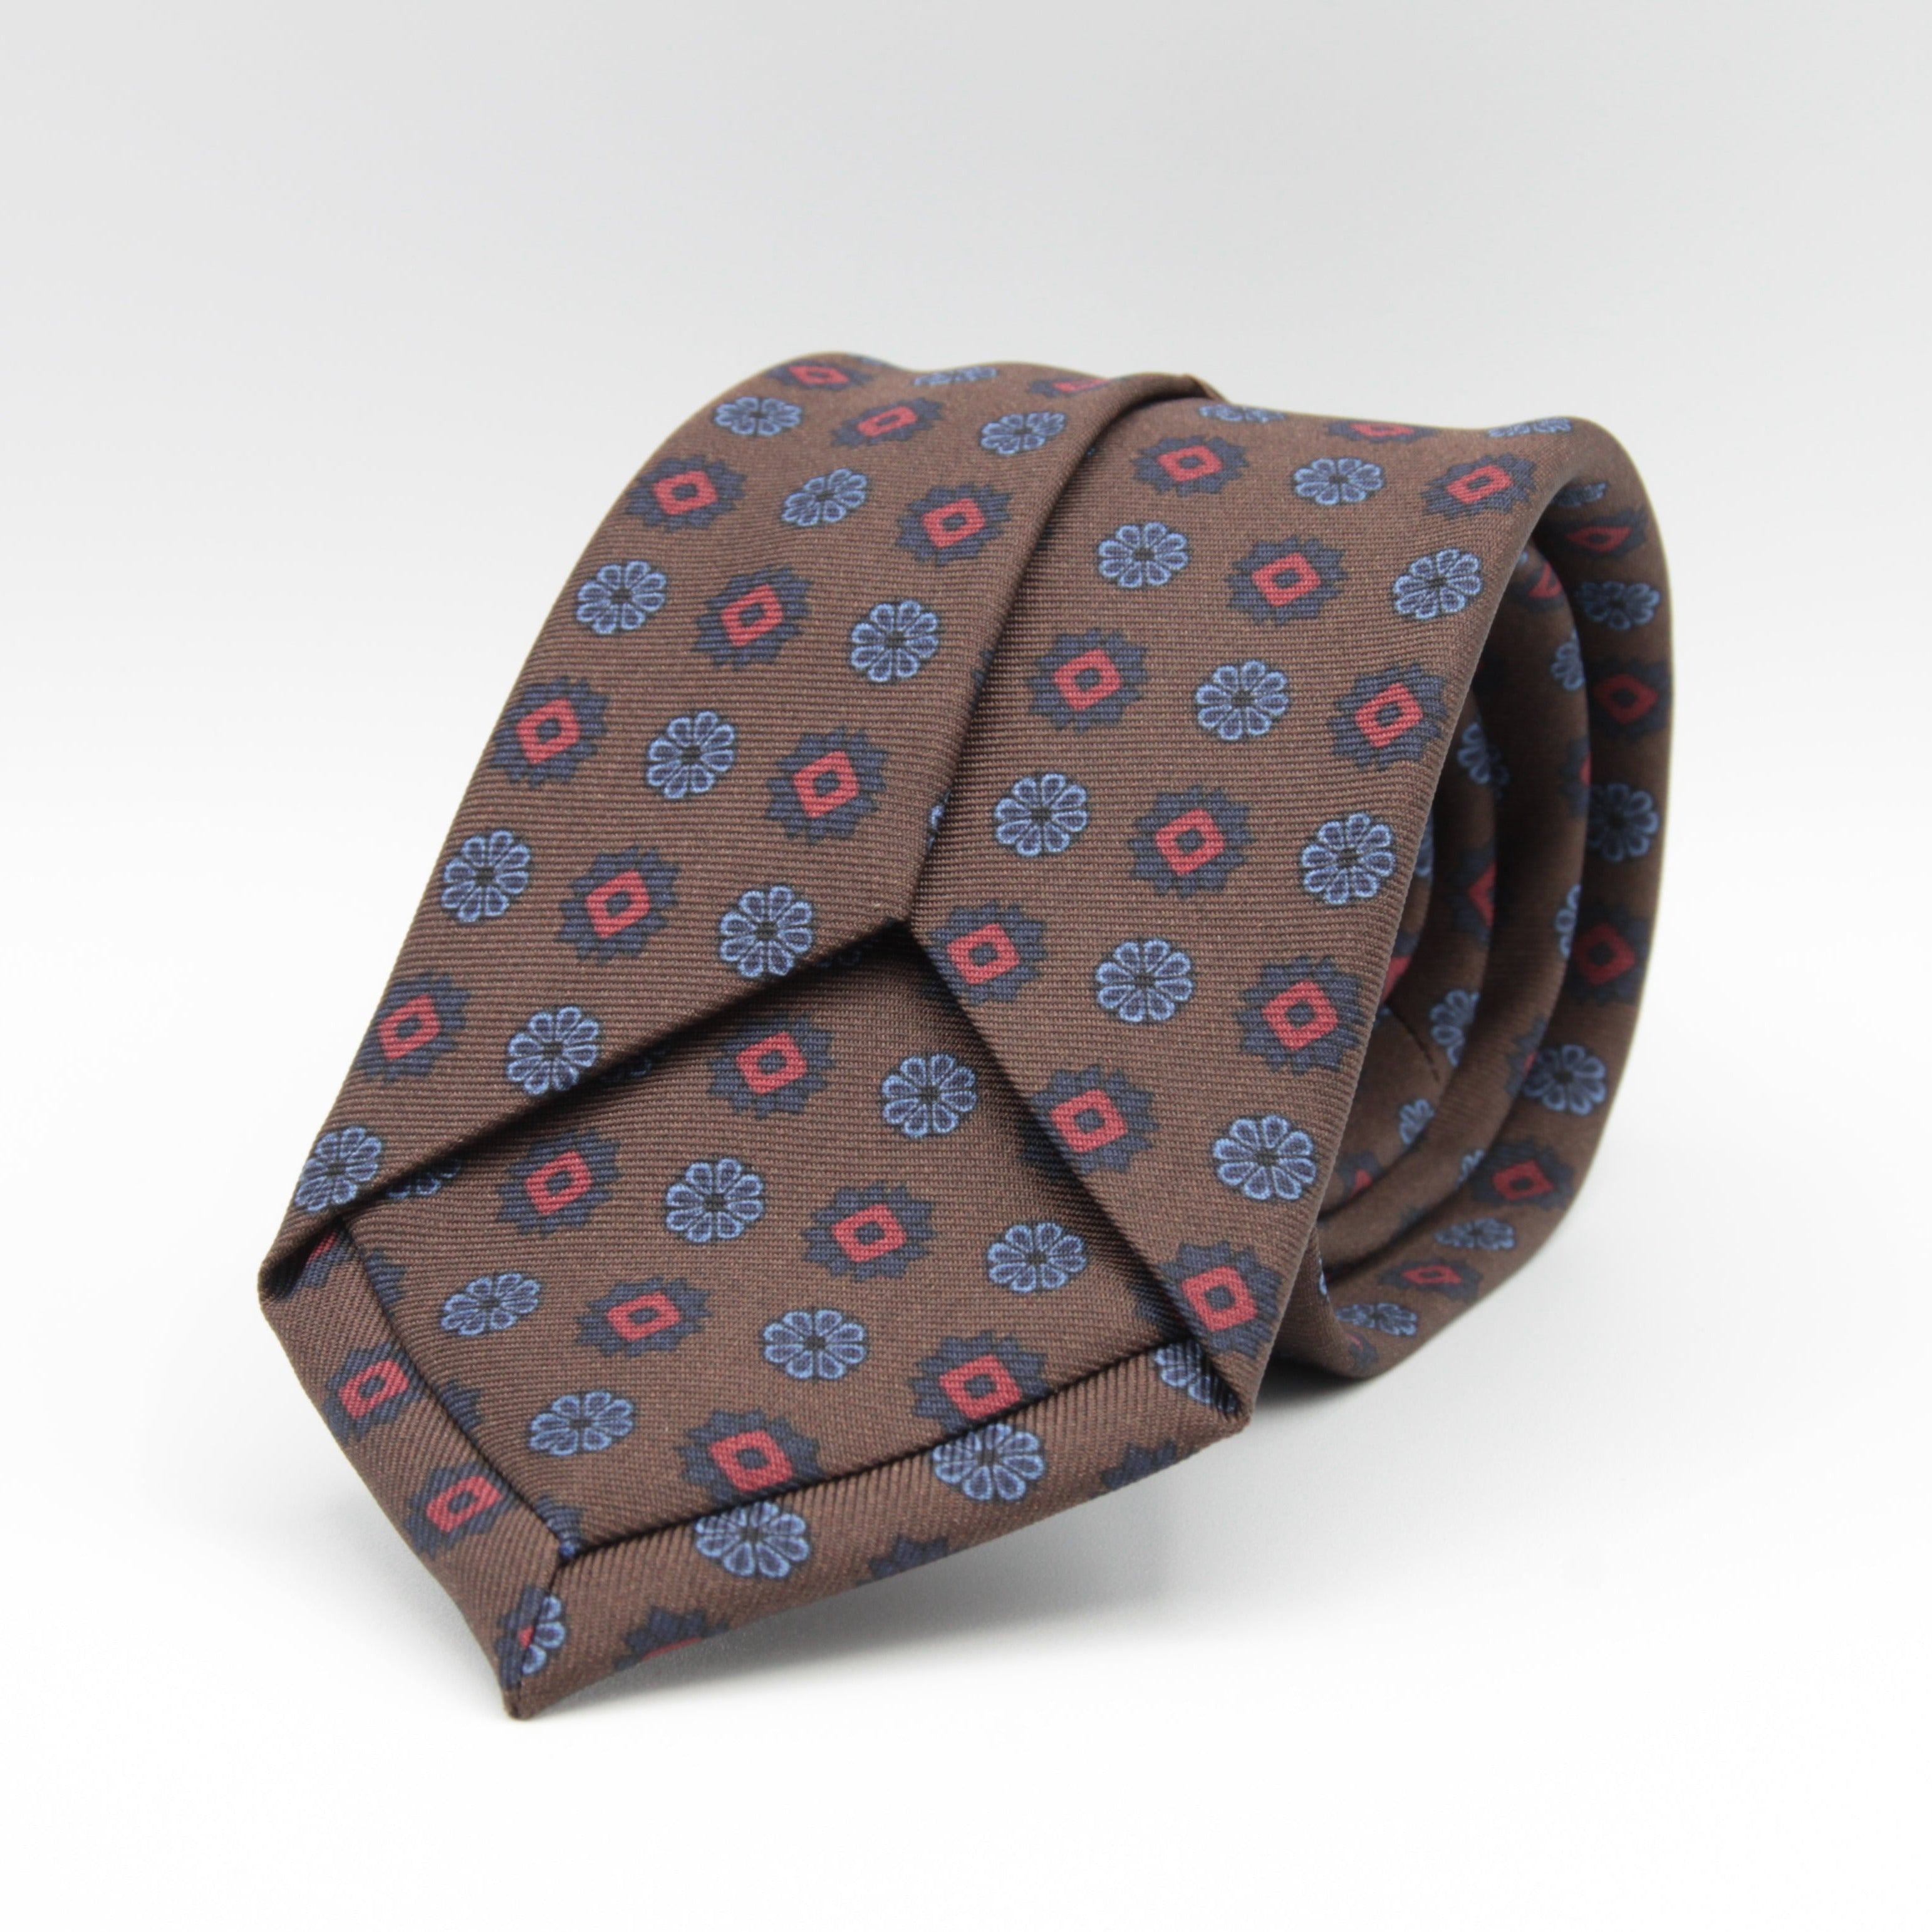 Holliday & Brown for Cruciani & Bella 100% printed Silk Self tipped Brown, Blue and Red motif tie Handmade in Italy 8 cm x 150 cm #6992